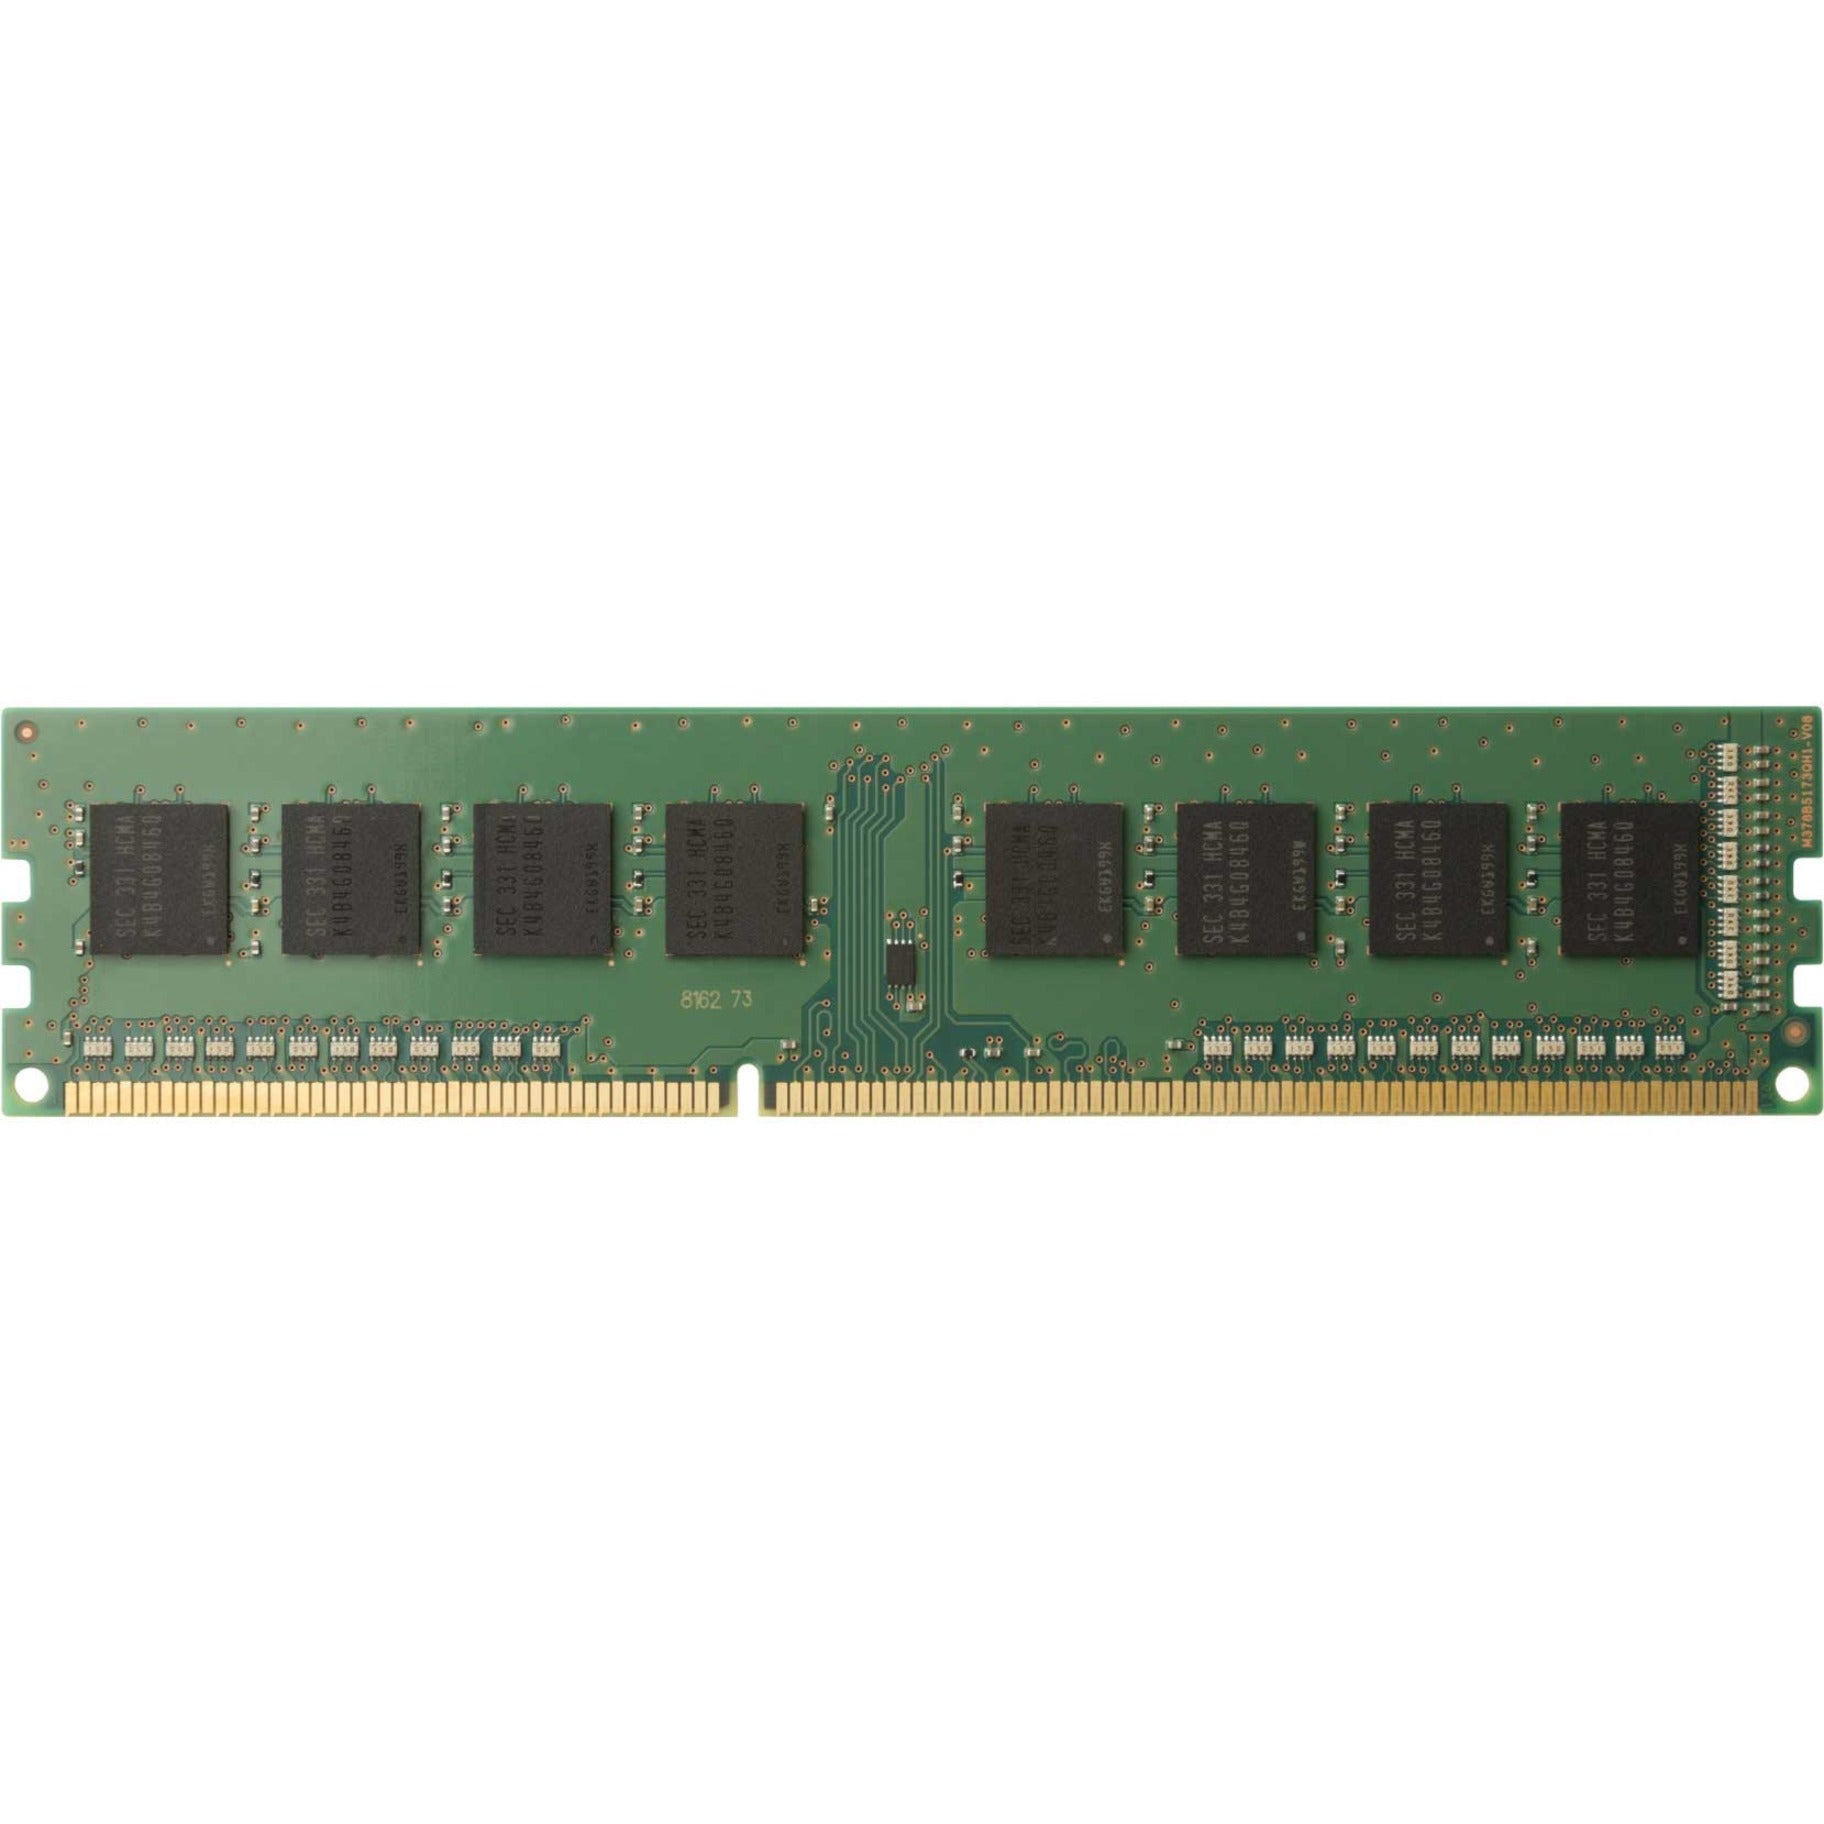 HP 7ZZ66AT 32GB DDR4 SDRAM Memory Module, High Performance RAM for Faster Computing